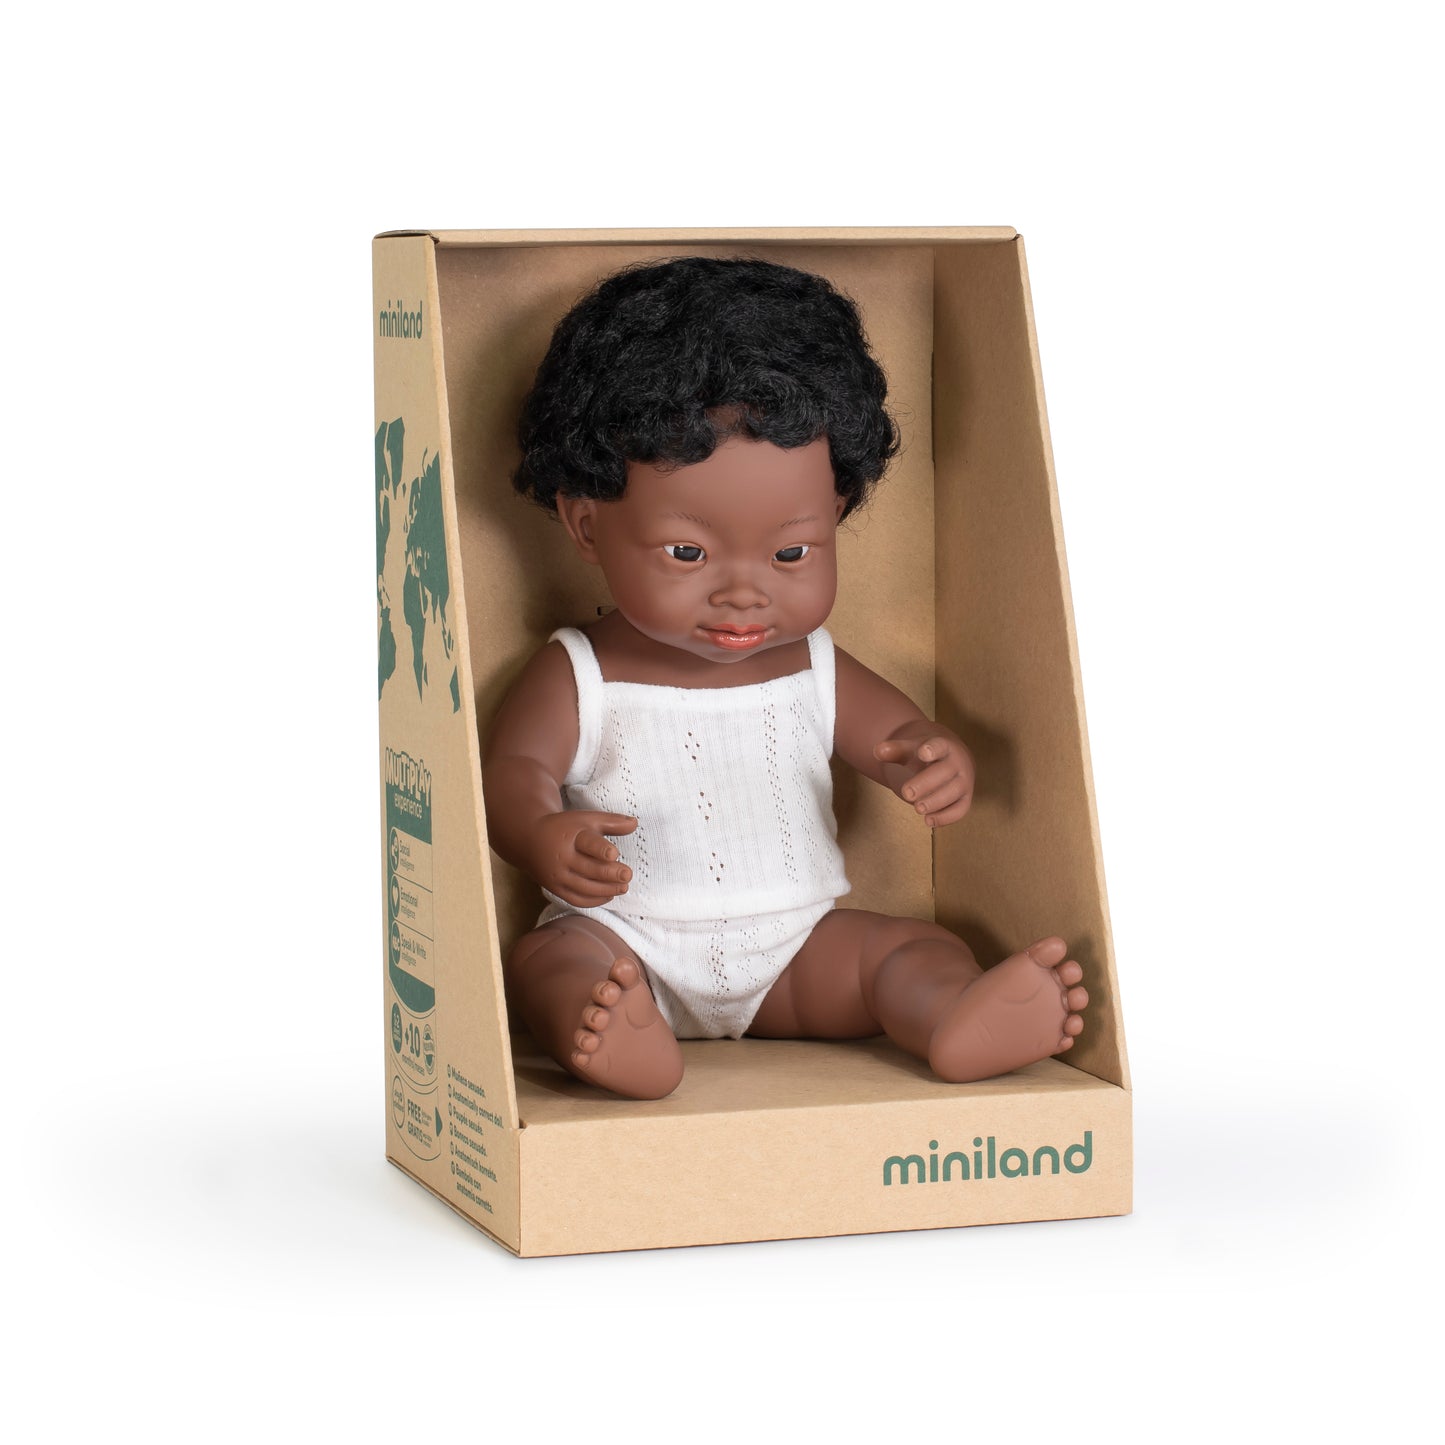 Miniland Doll | Anatomically Correct Baby, African Boy With Down Syndrome 38cm